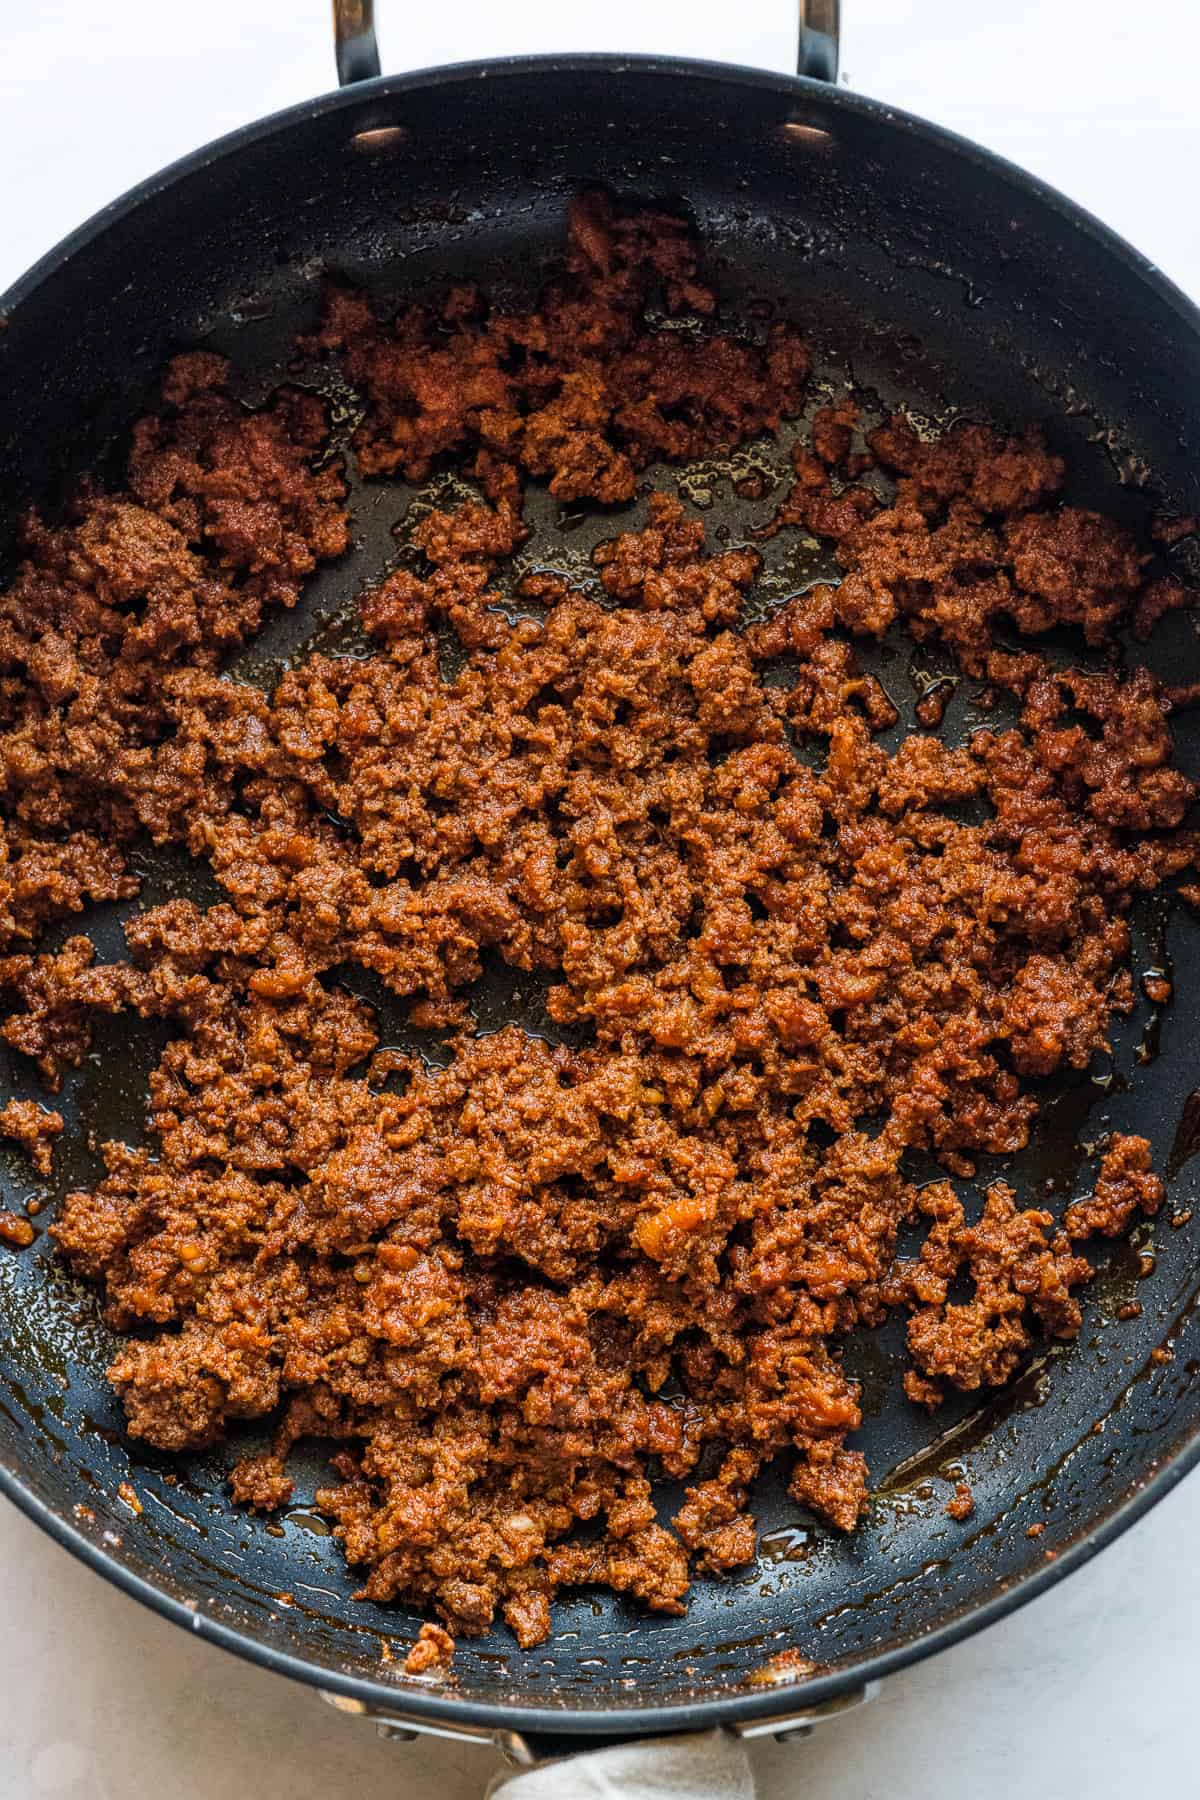 A skillet of cooked chorizo